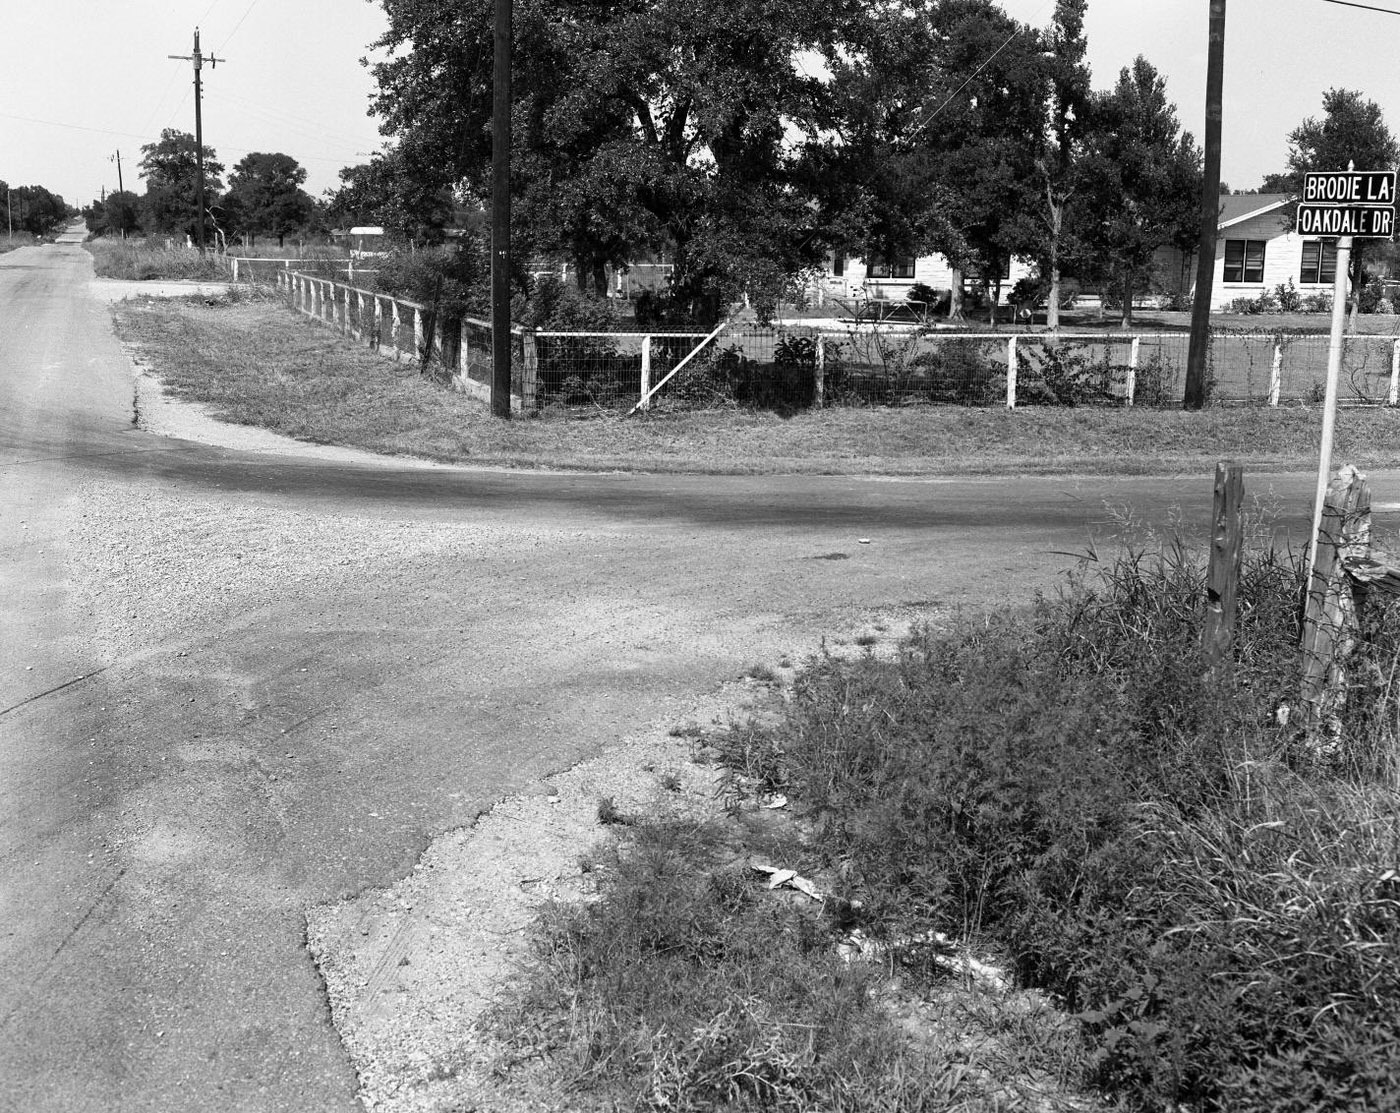 Powell Property at Intersection of Brodie Ln. and Oakdale Dr., 1958.